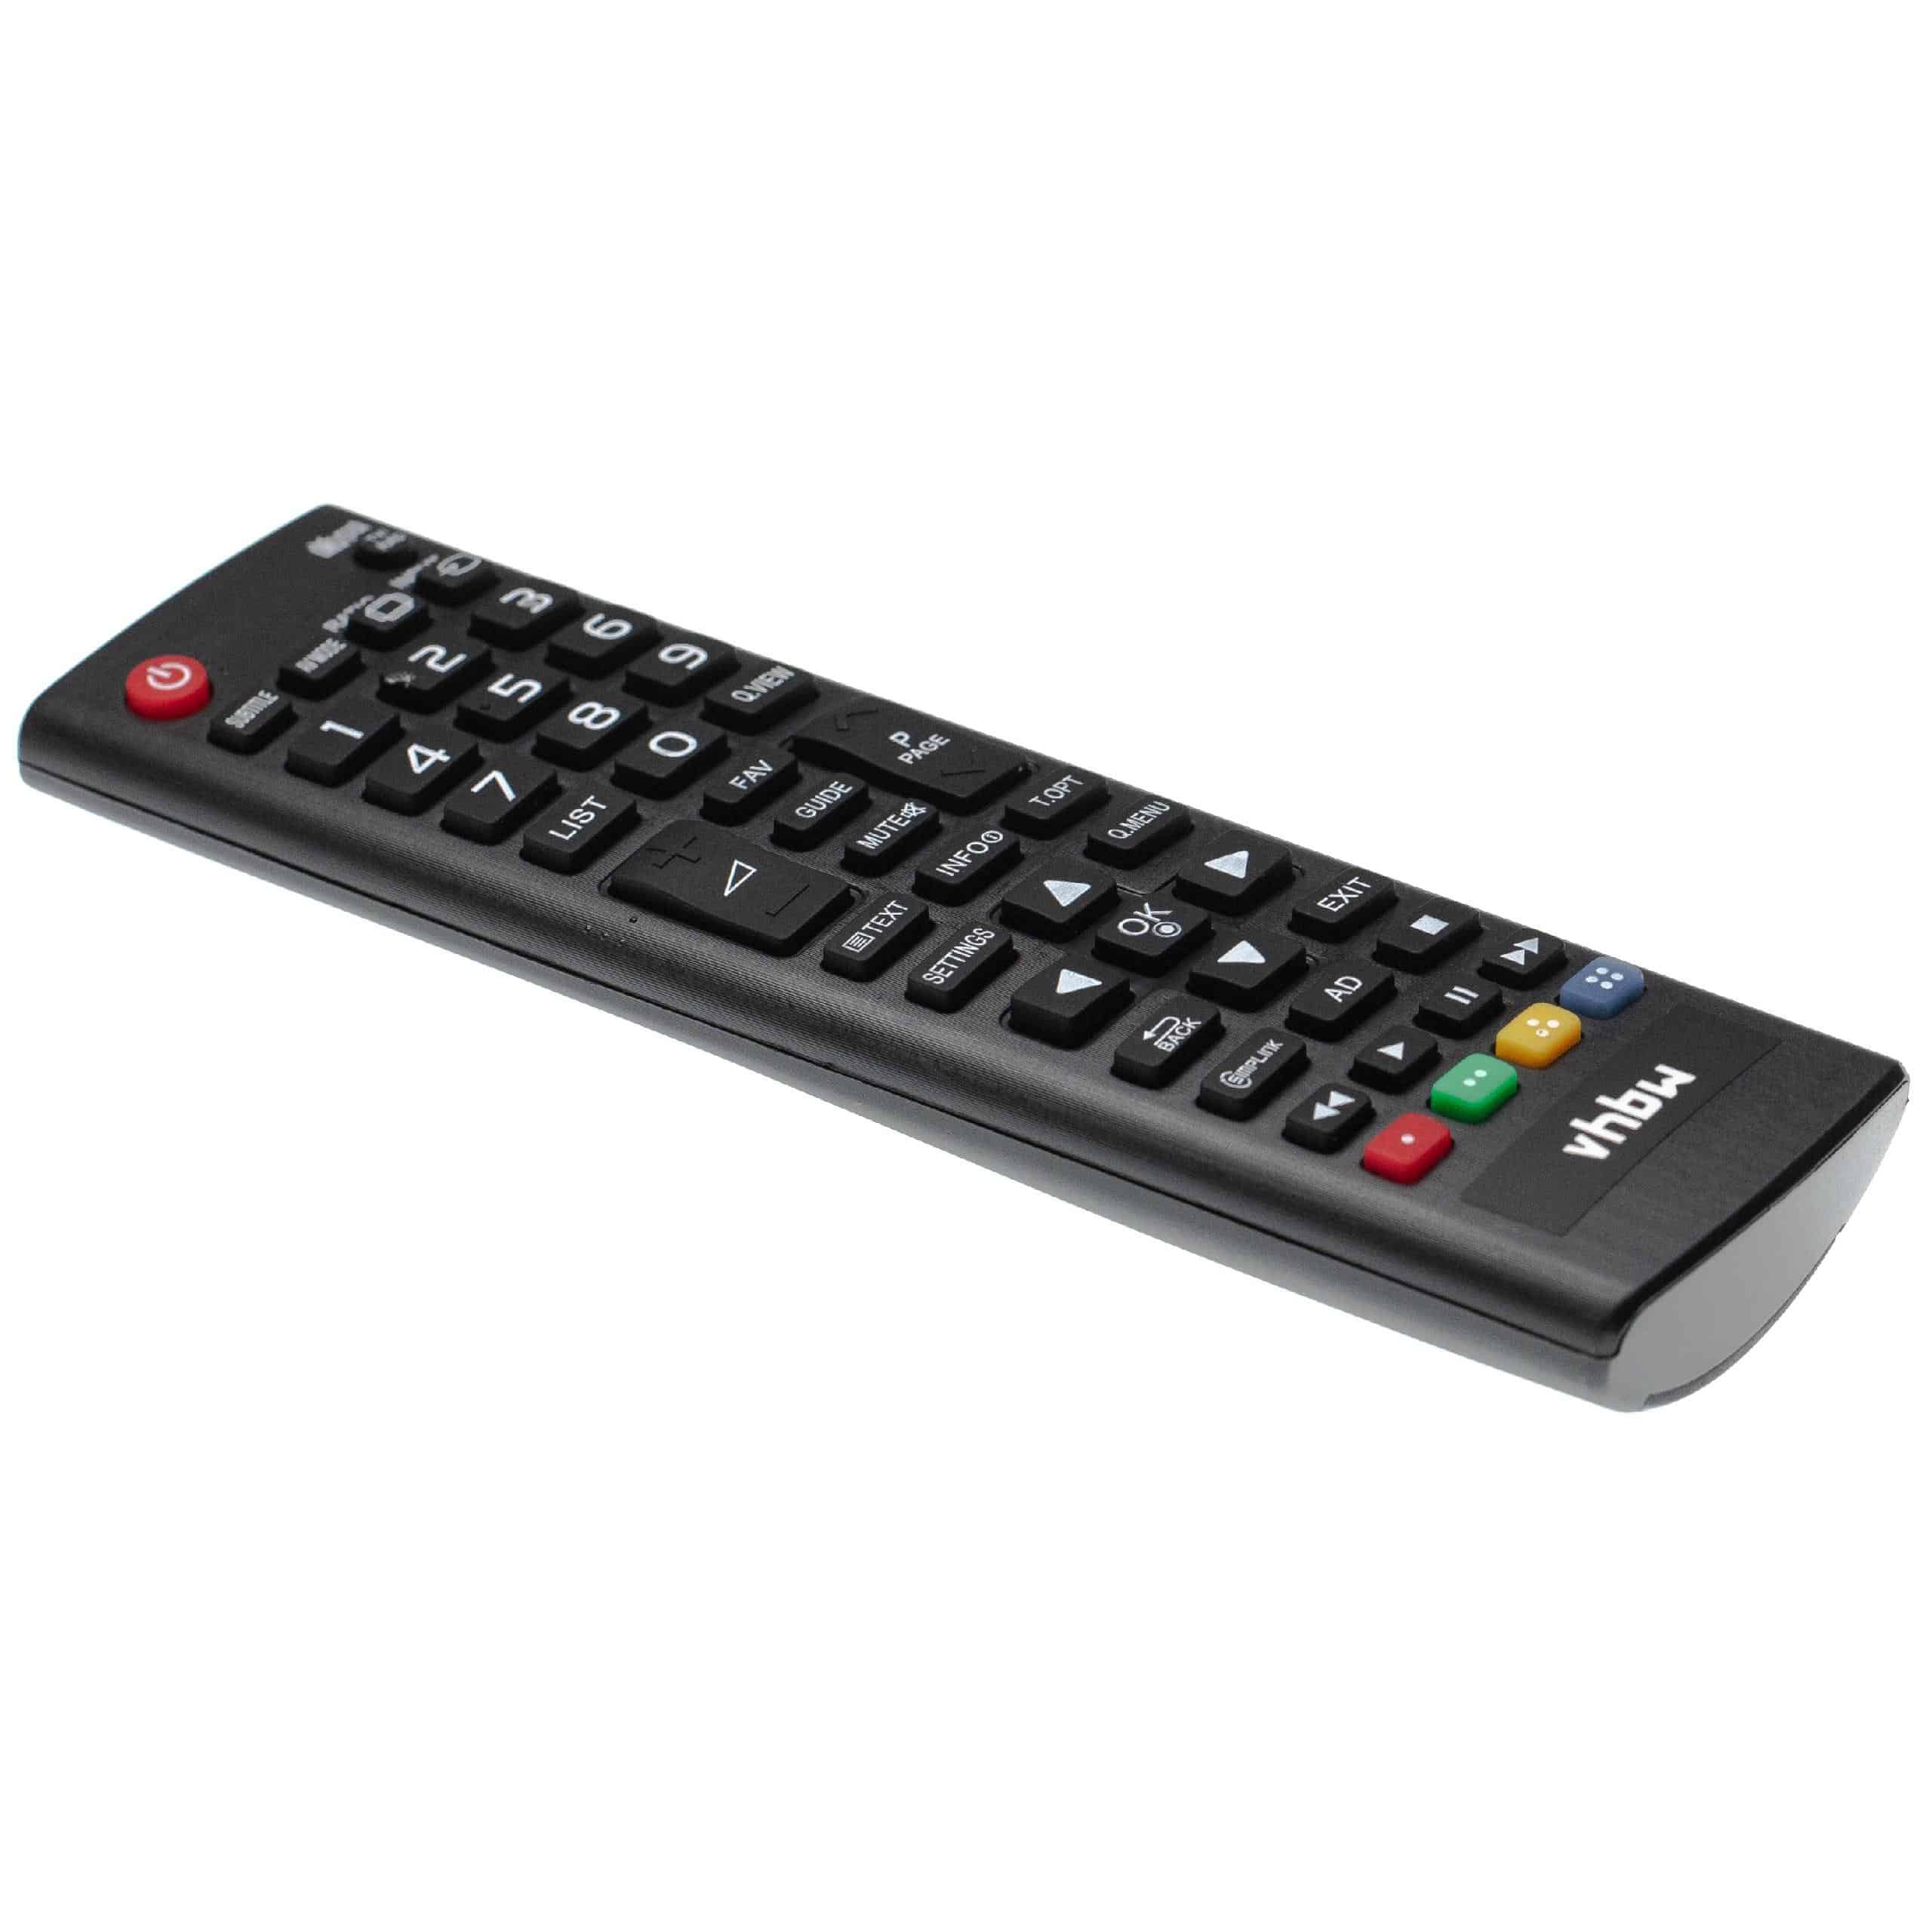 Remote Control replaces LG AKB73715603 for LG TV